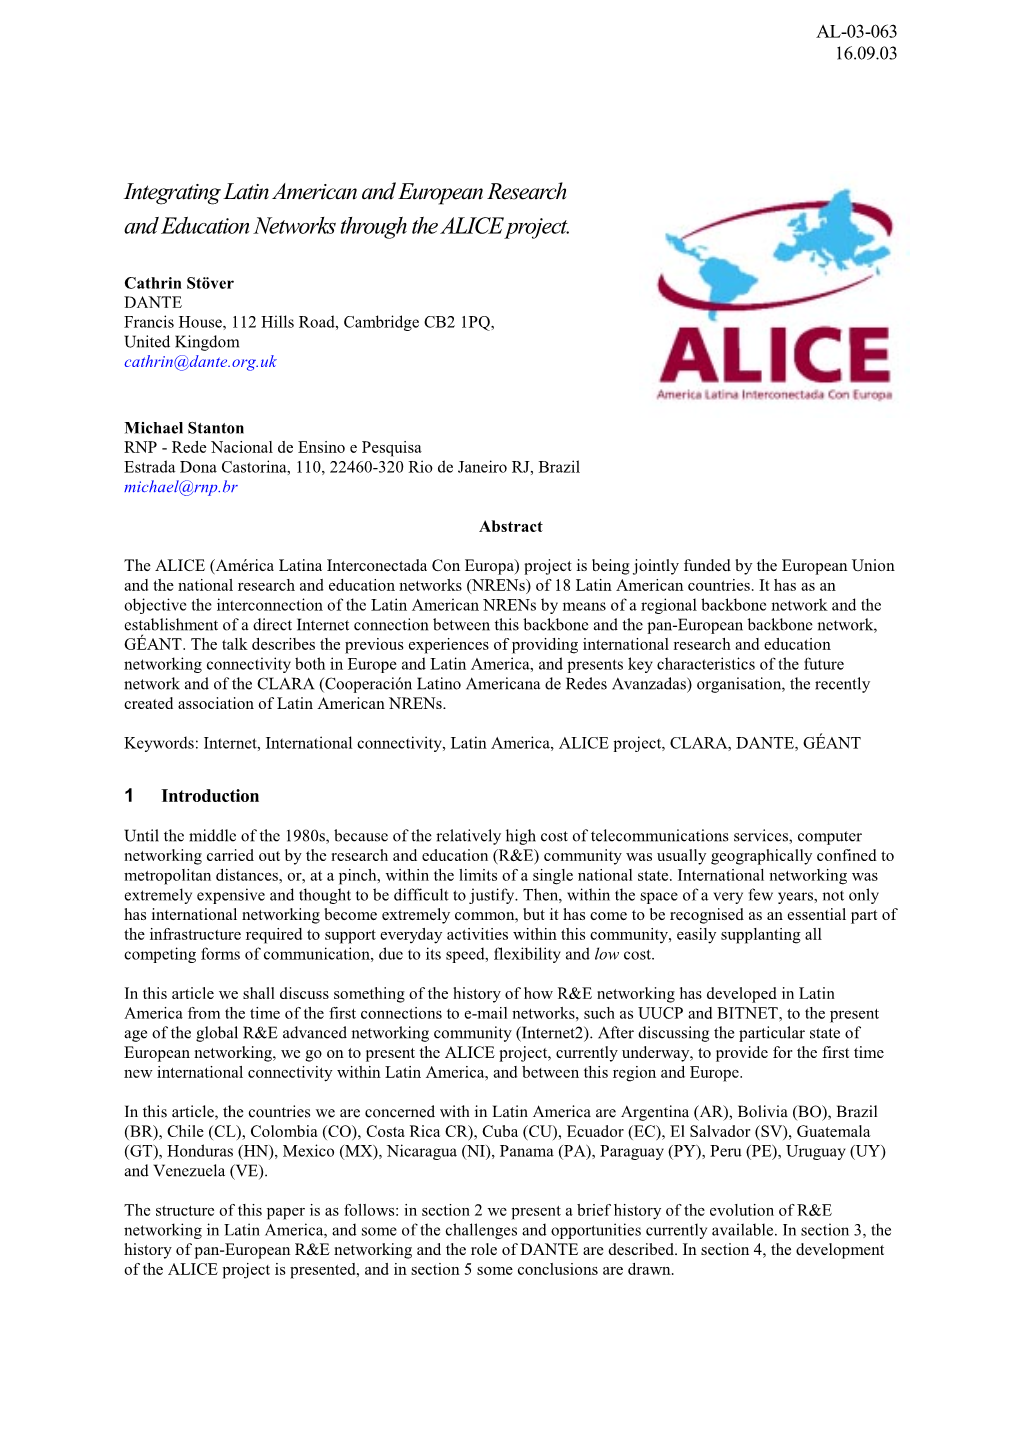 Integrating Latin American and European Research and Education Networks Through the ALICE Project